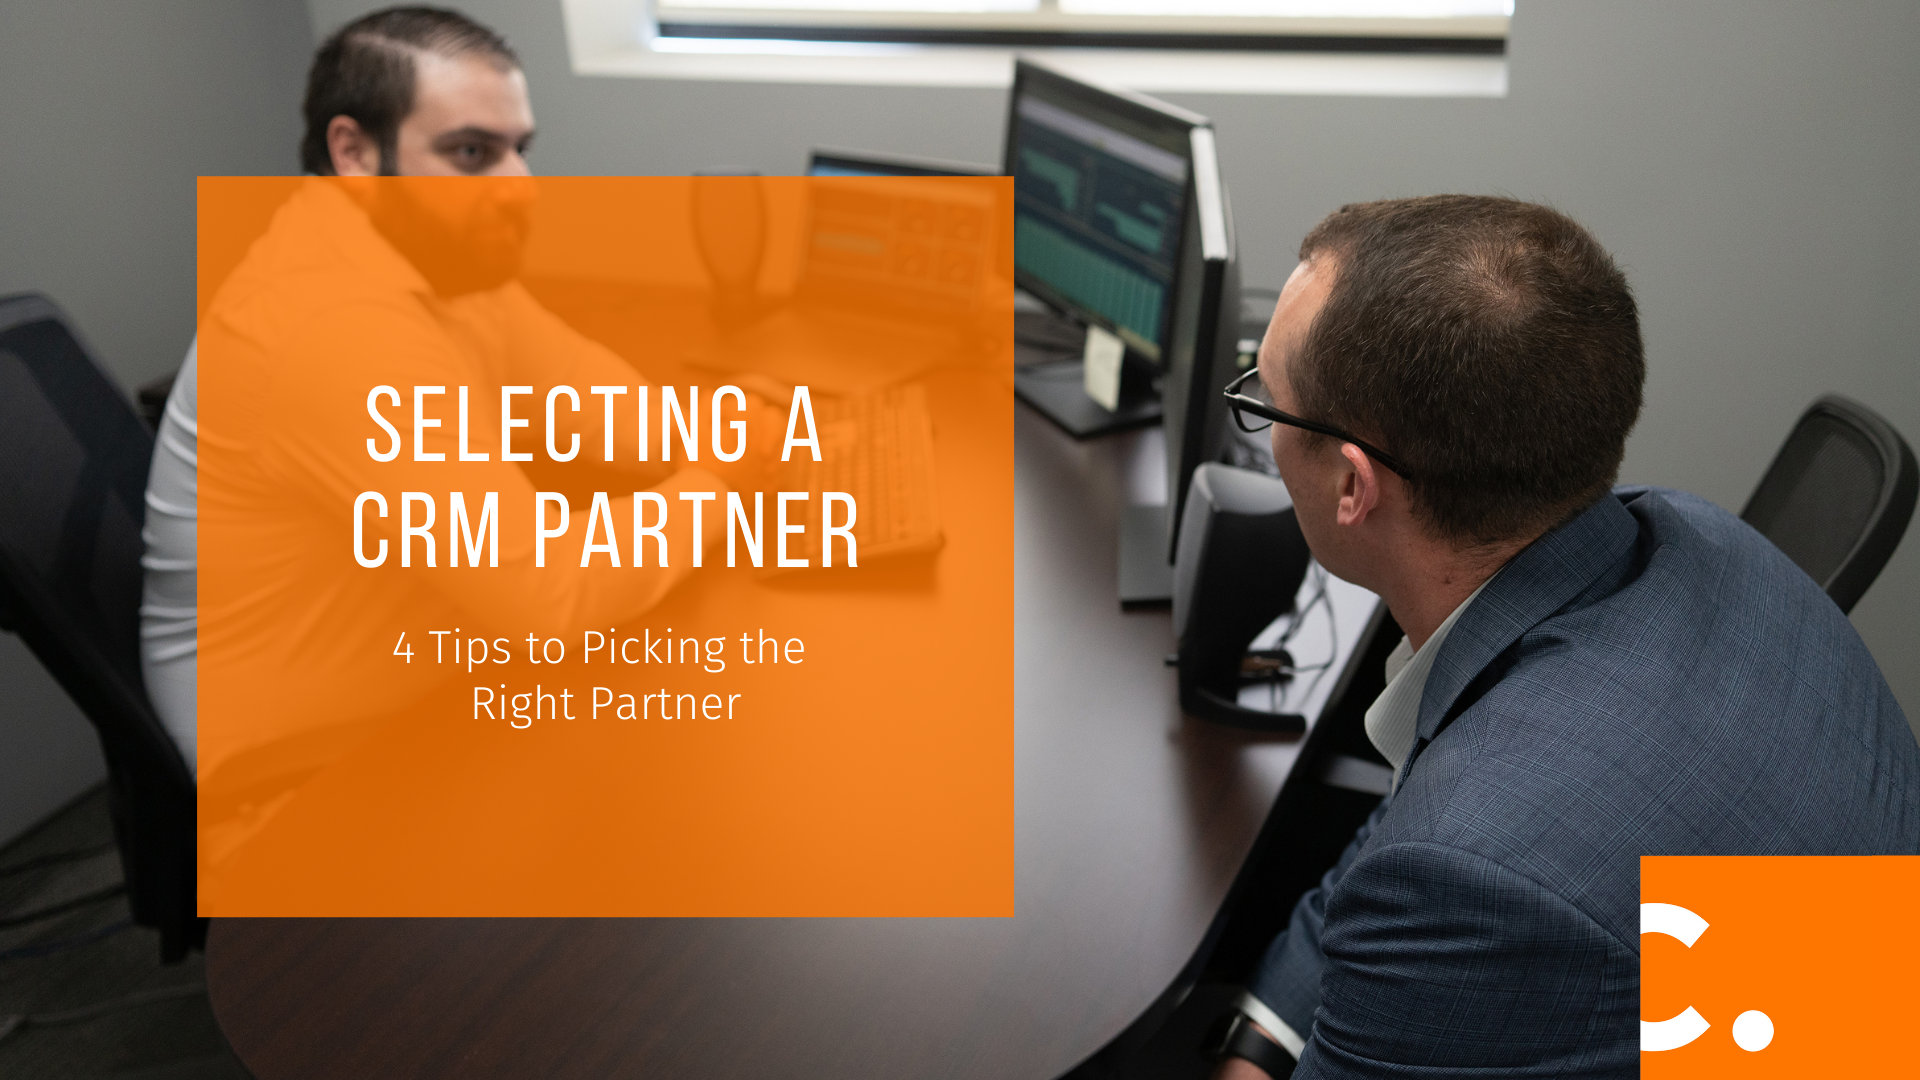 Not getting the most out of your CRM investment? Read this blog to see what to look for when selecting a CRM partner.